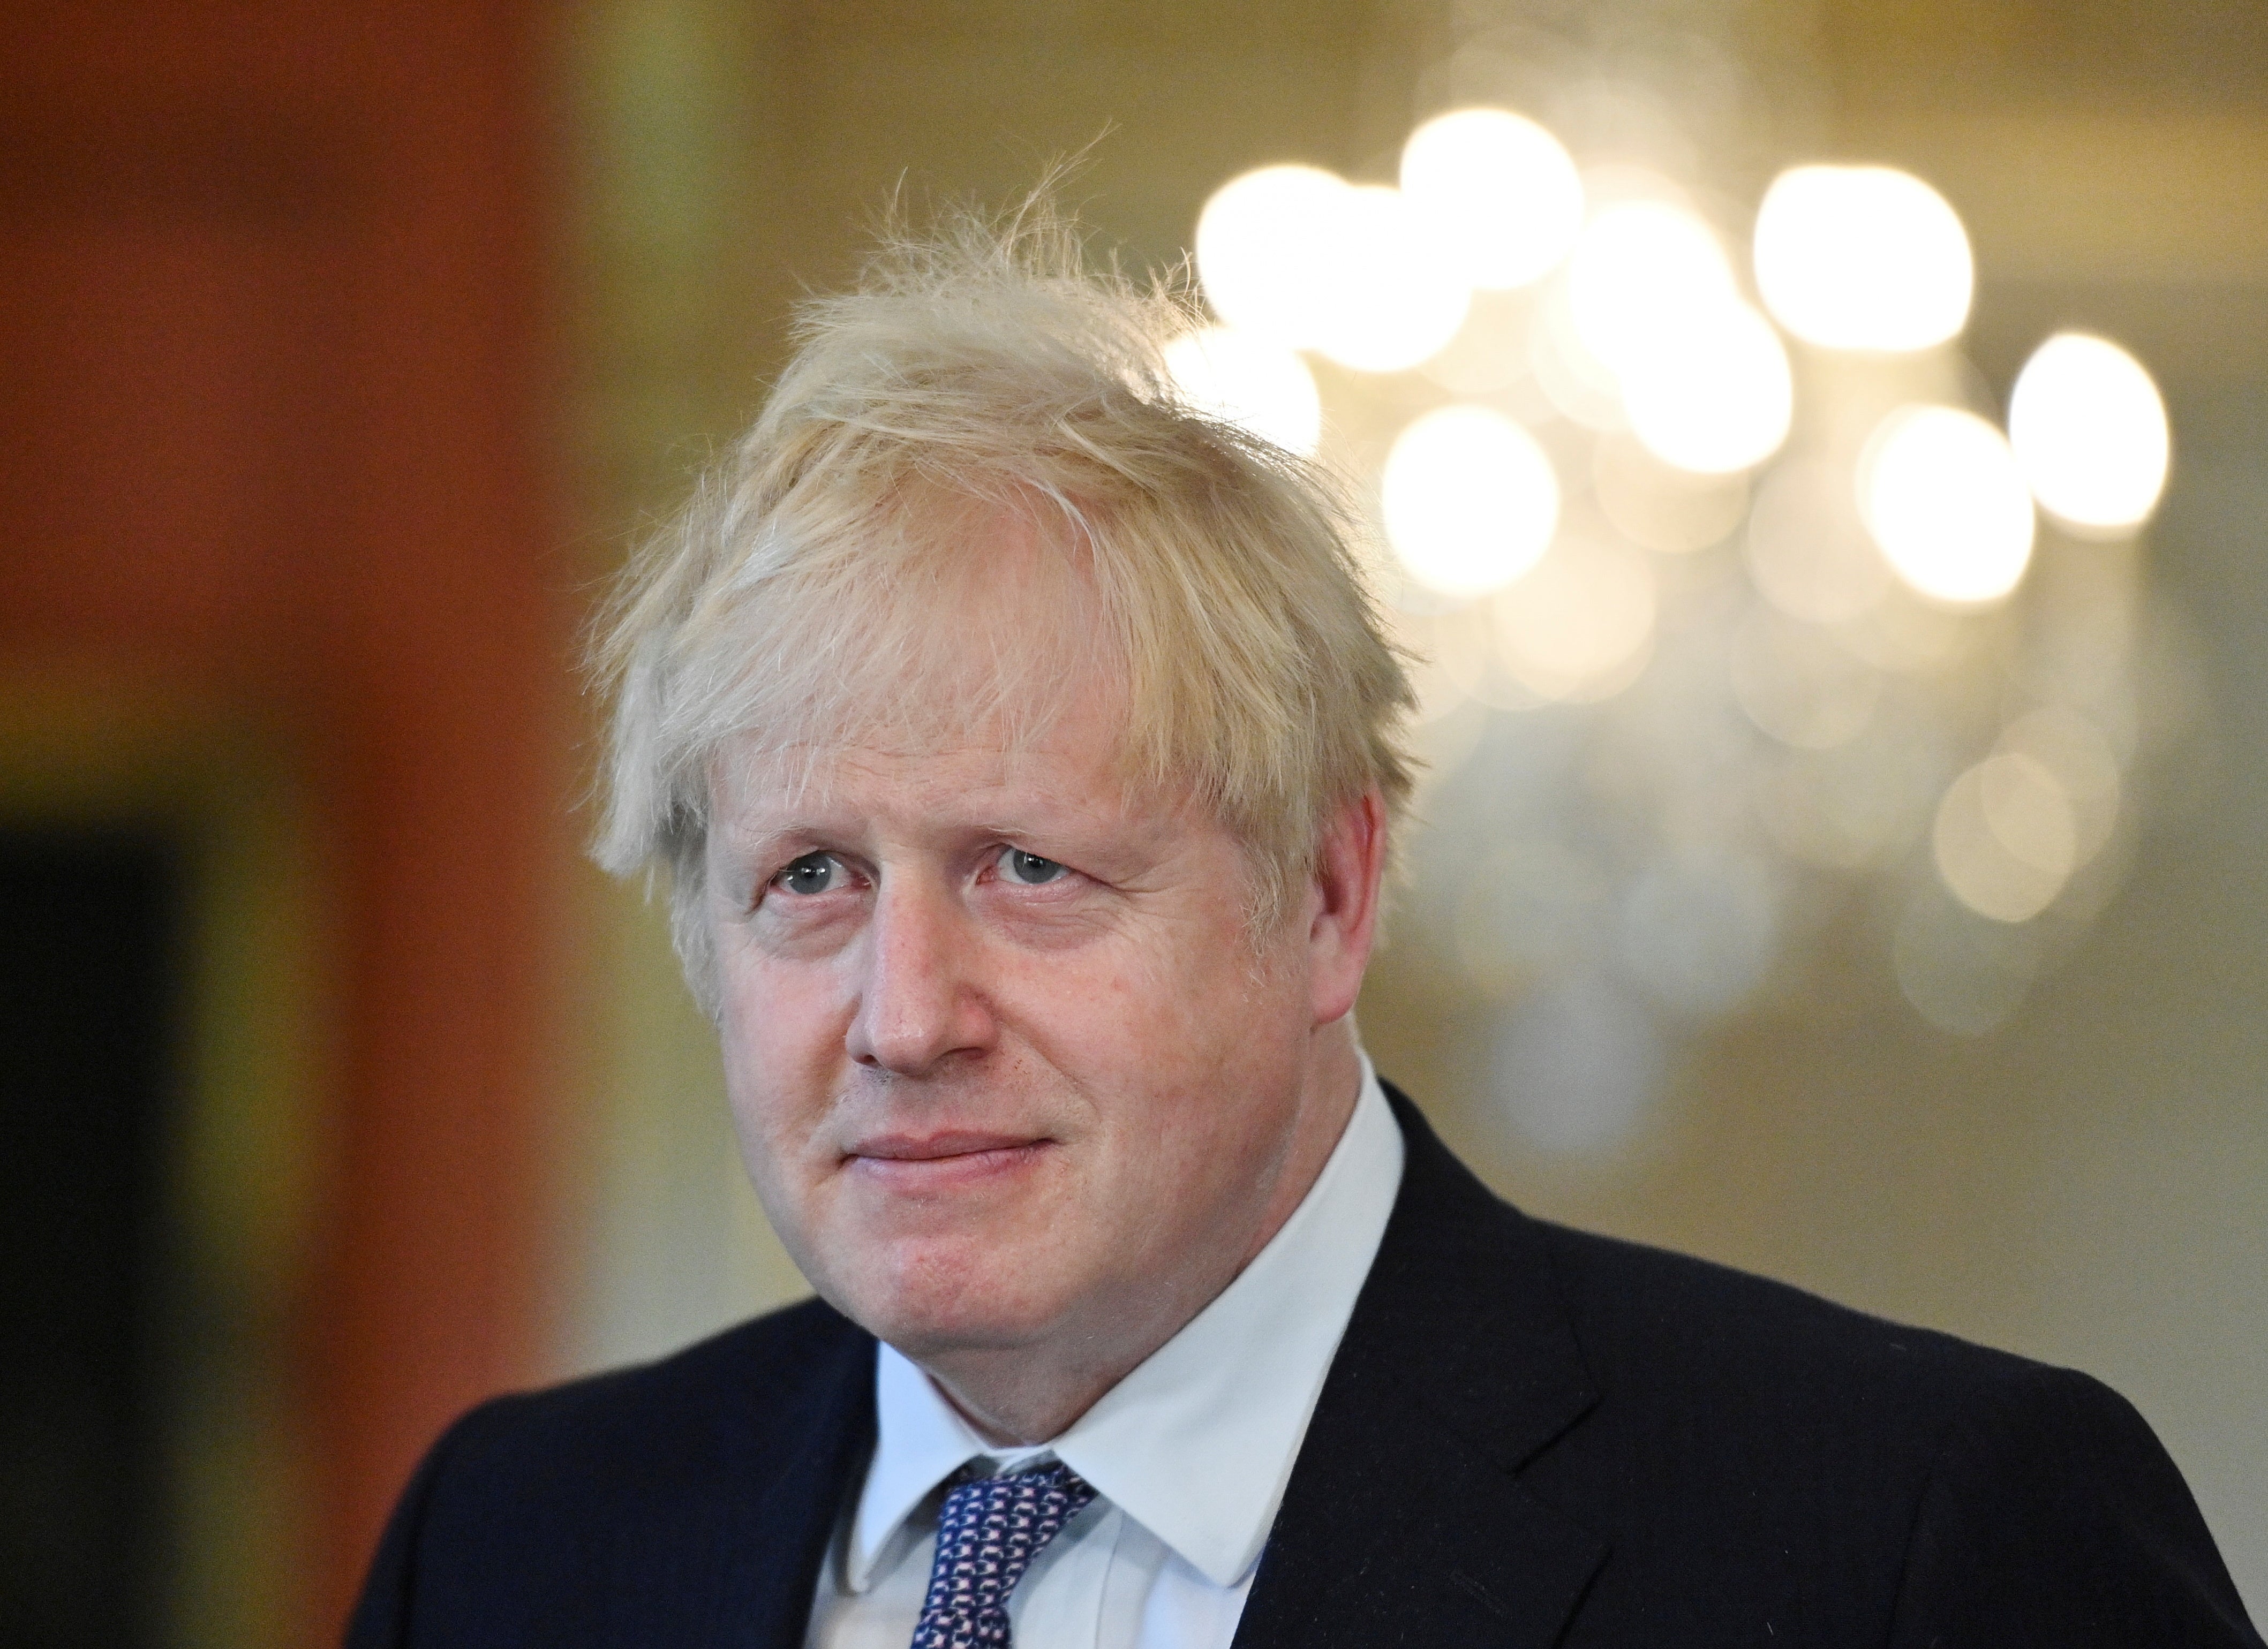 Donations made to Boris Johnson’s party did not appear to comply with the law